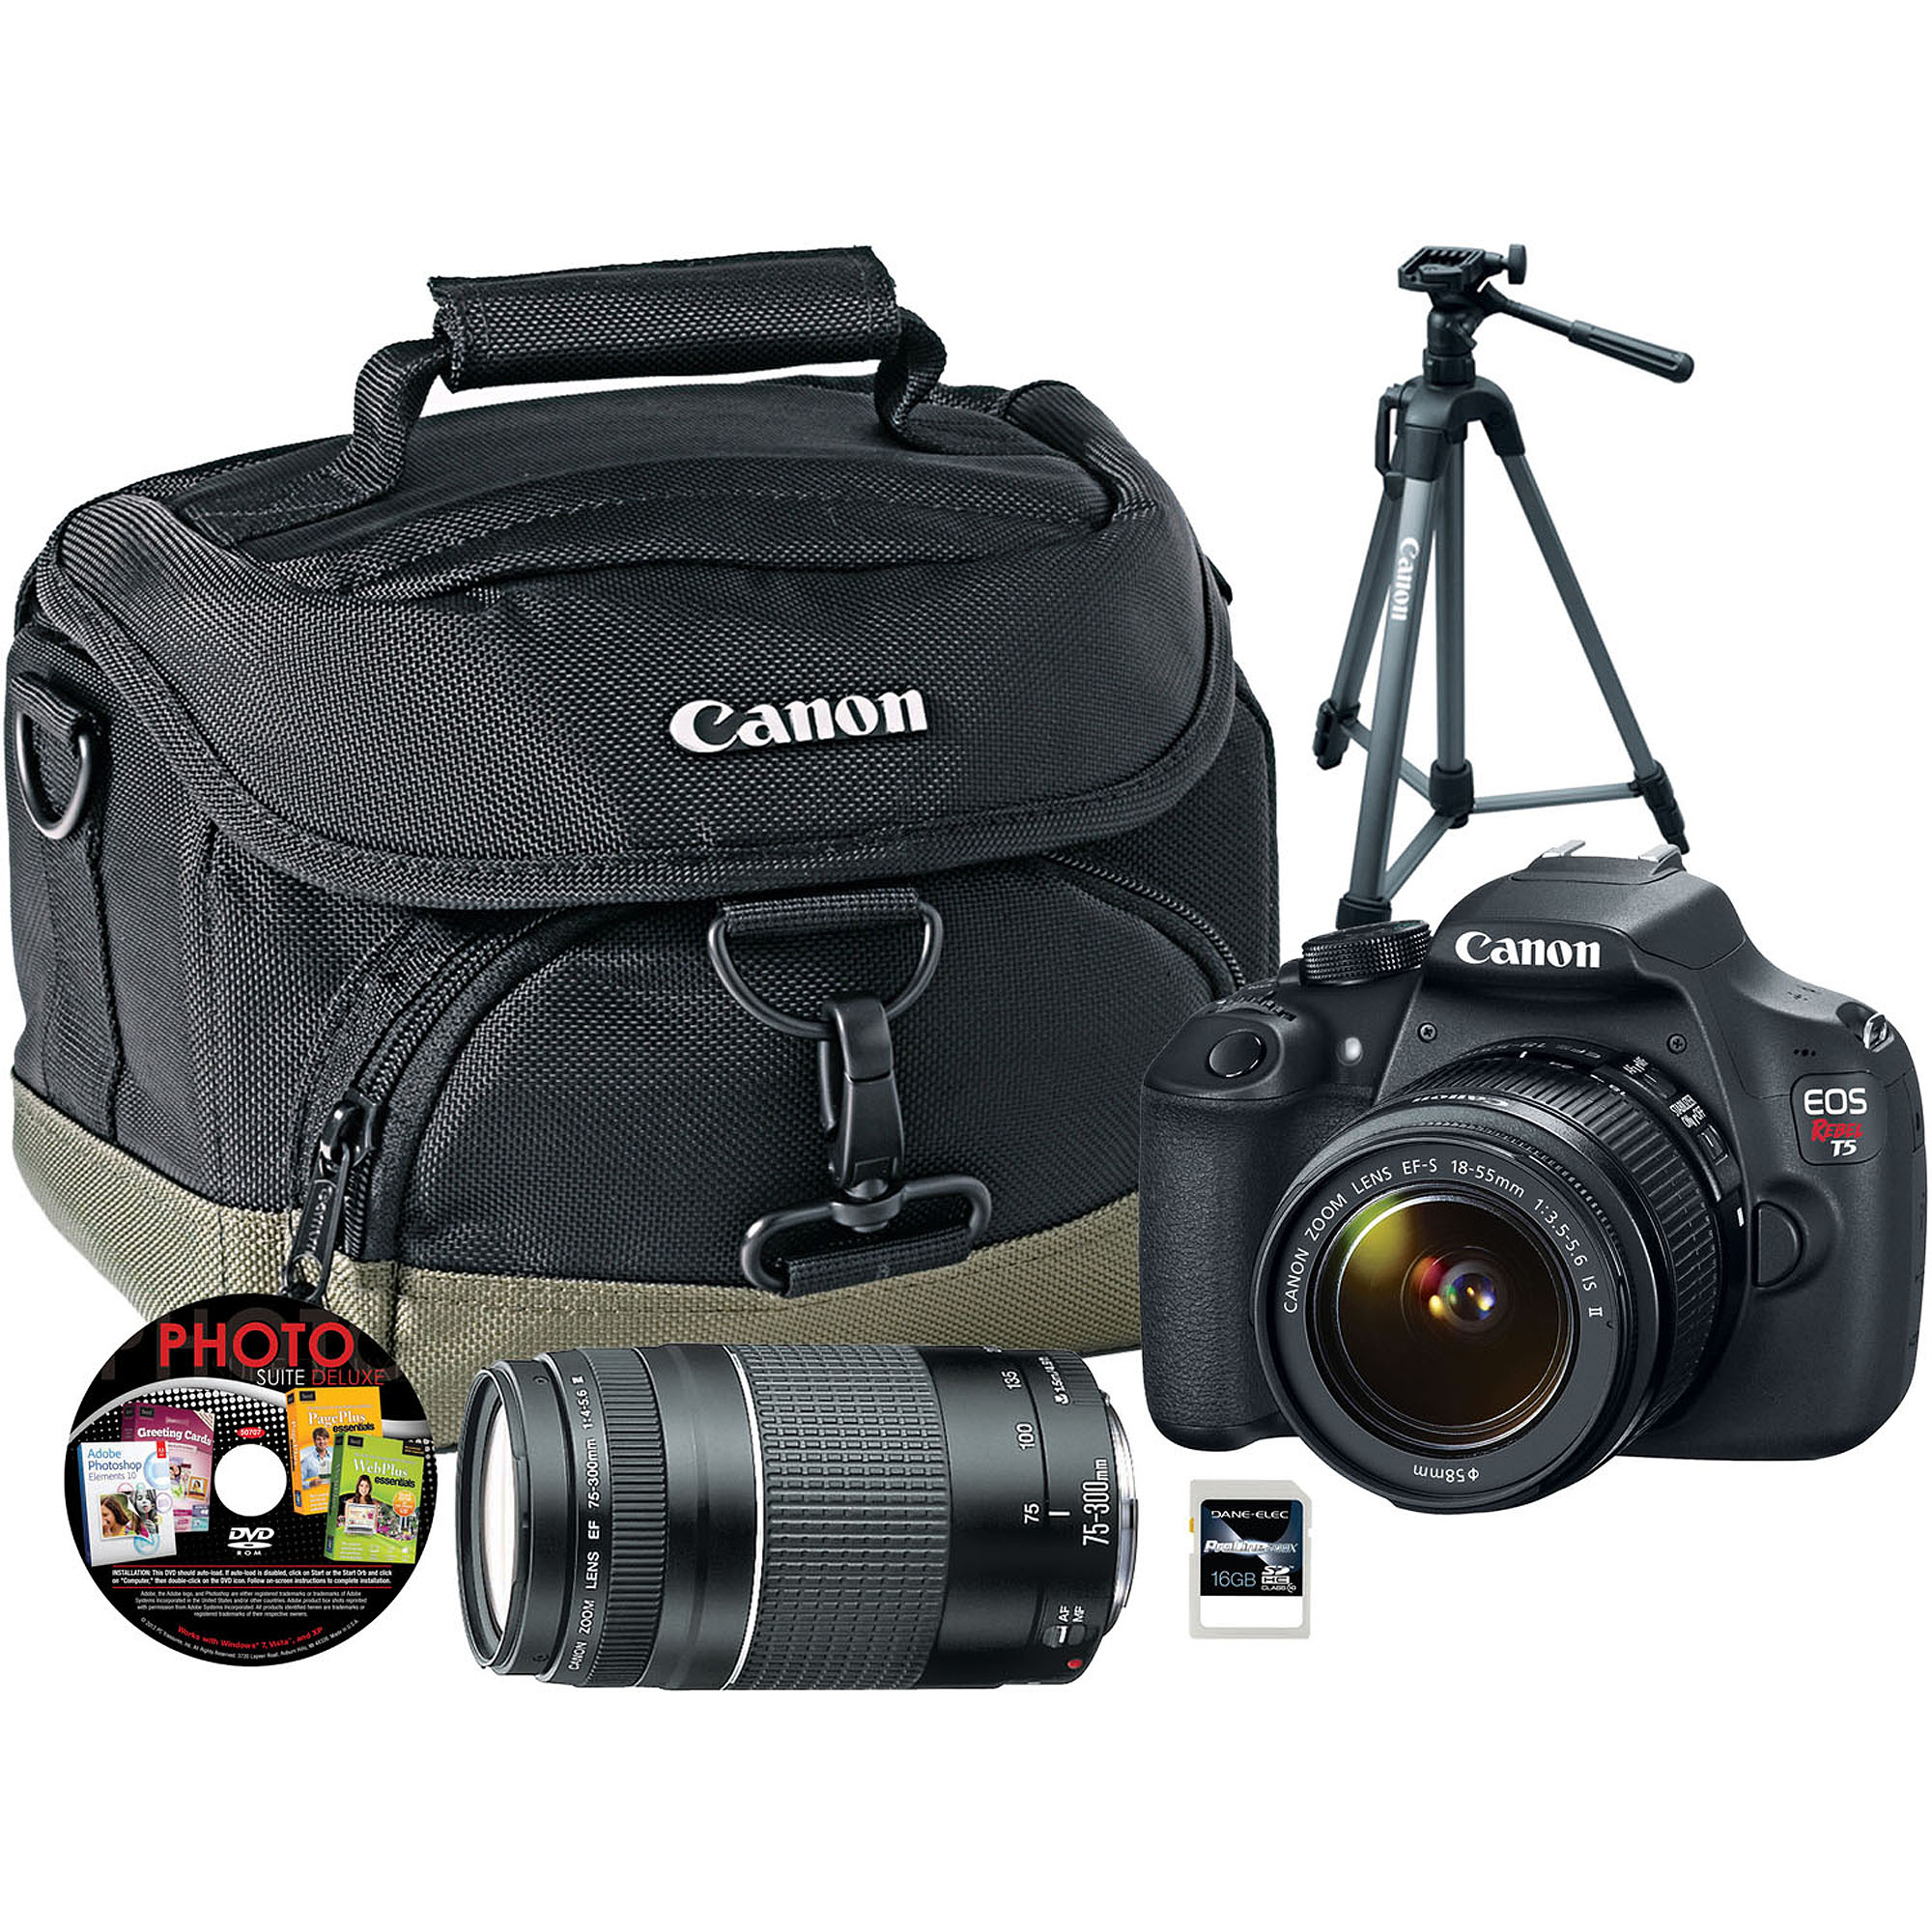 Canon Eos Rebel T5 Ef-s18-55mm Is Ii Kit - image 1 of 8